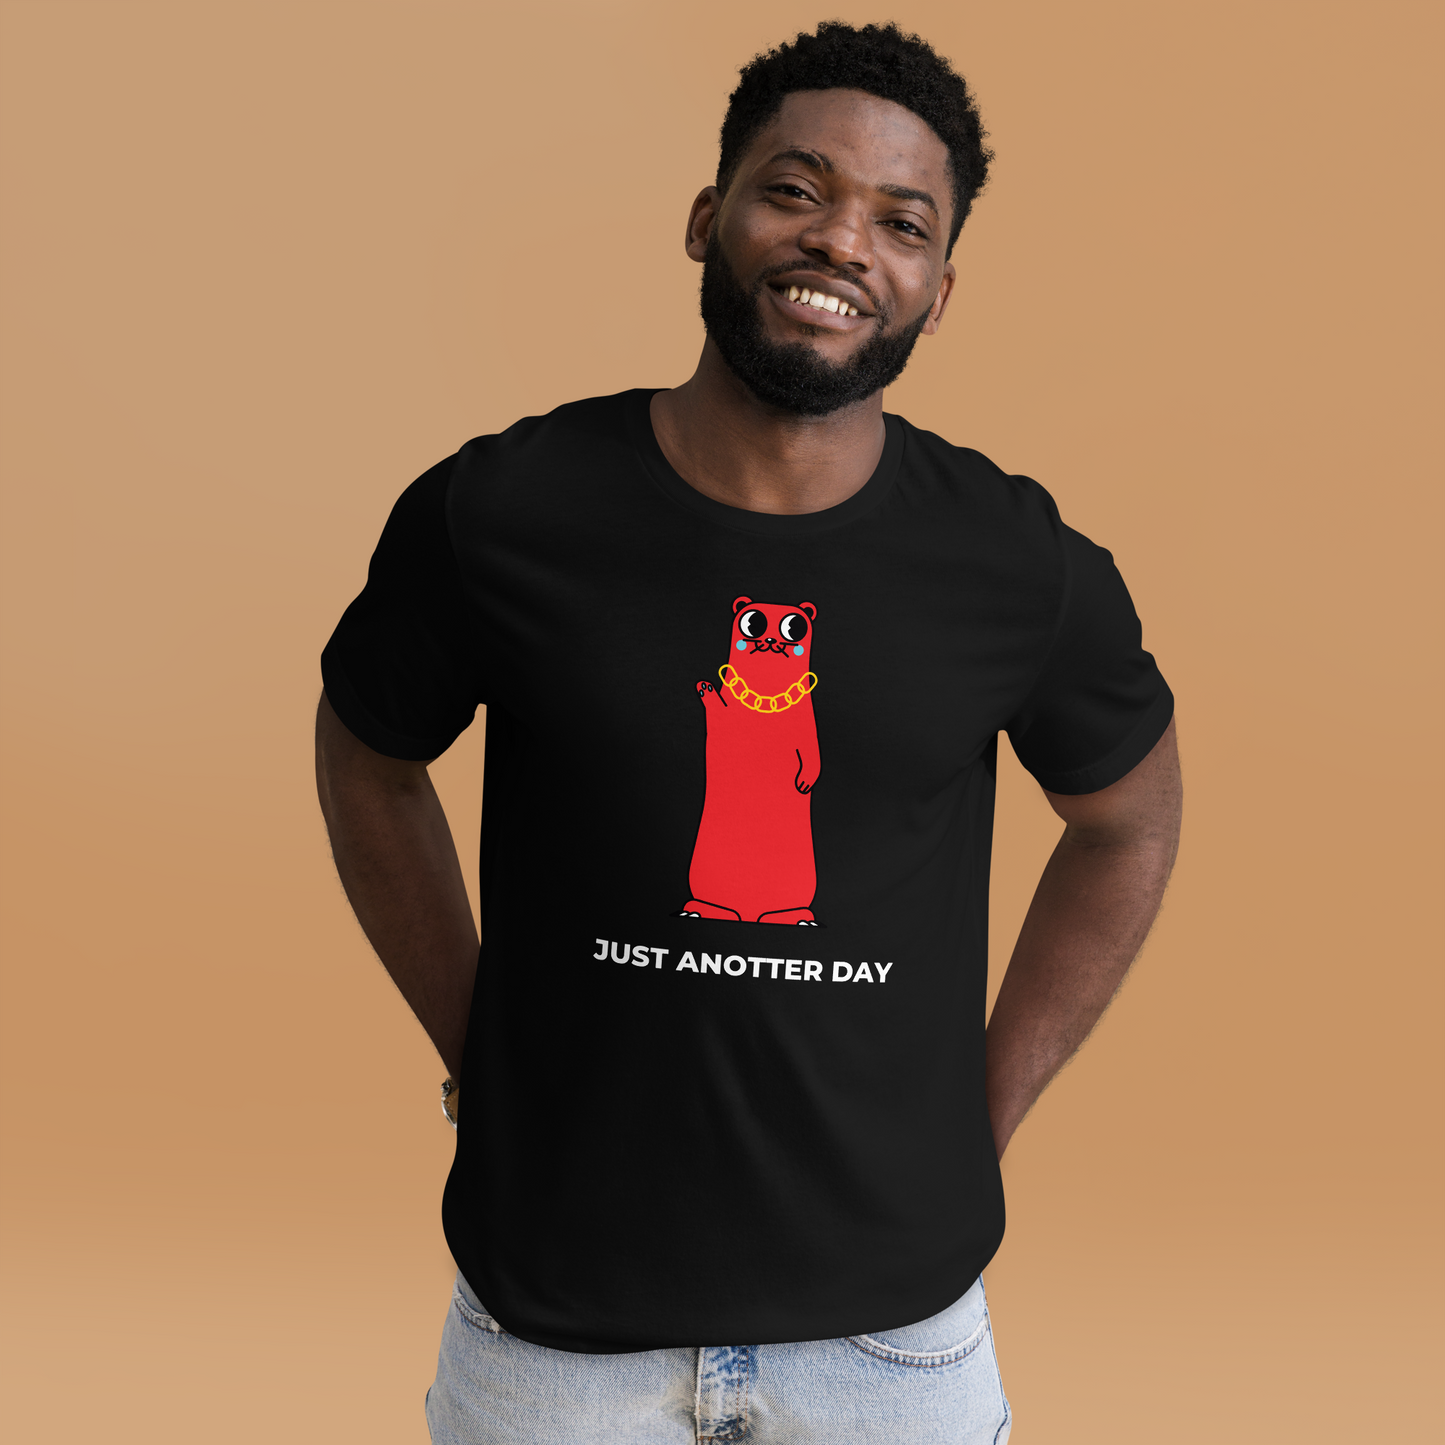 Smiling man wearing a Black Premium Otter T-Shirt featuring a Just Anotter Day graphic on the chest - Funny Graphic Otter Tees - Boozy Fox